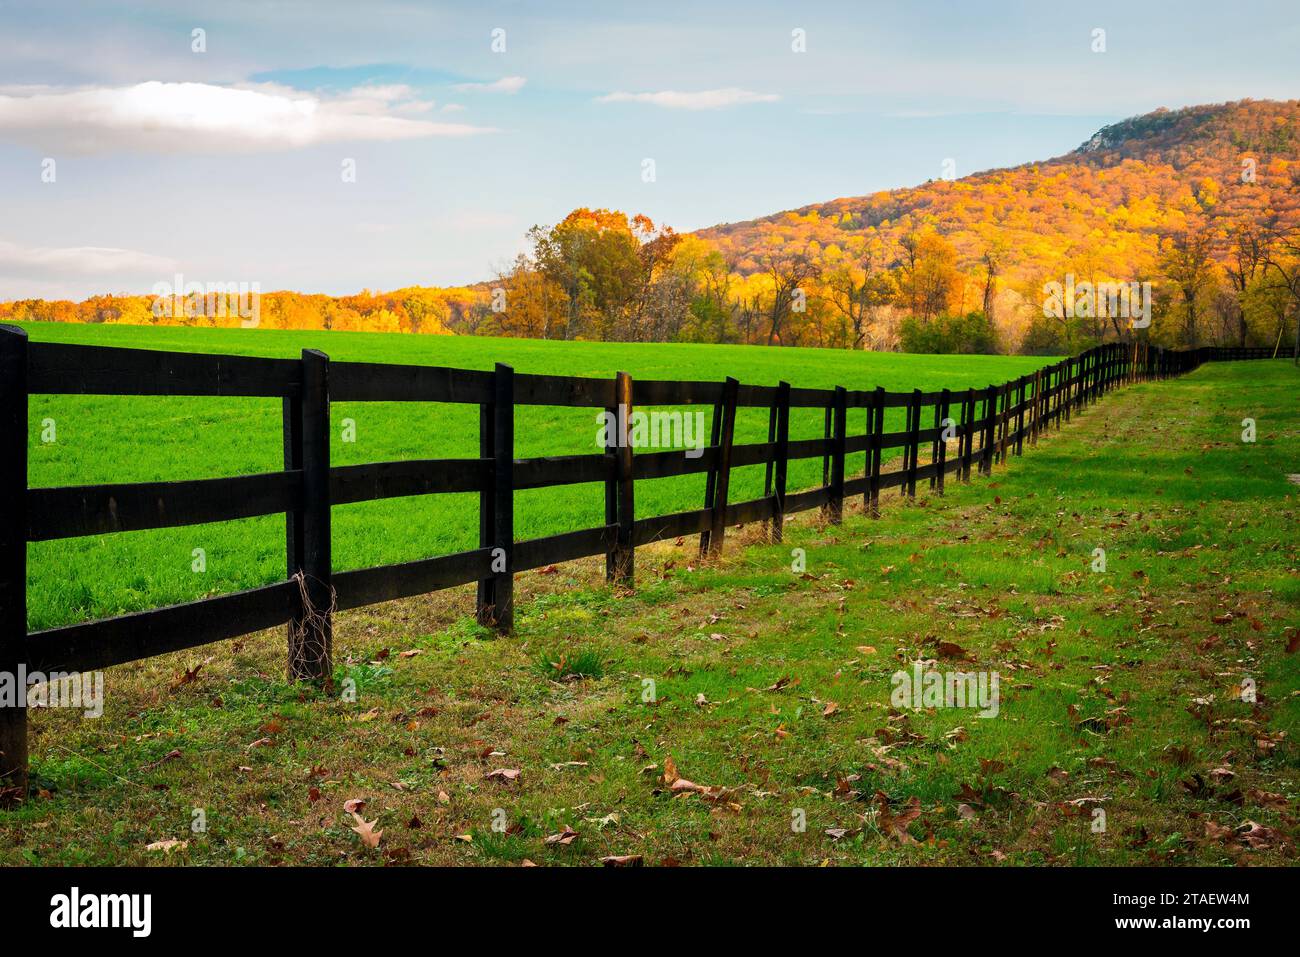 Proof that the grass is greener on the other side of the fence. Sunlit Sugarloaf Mountain is in the background. Stock Photo